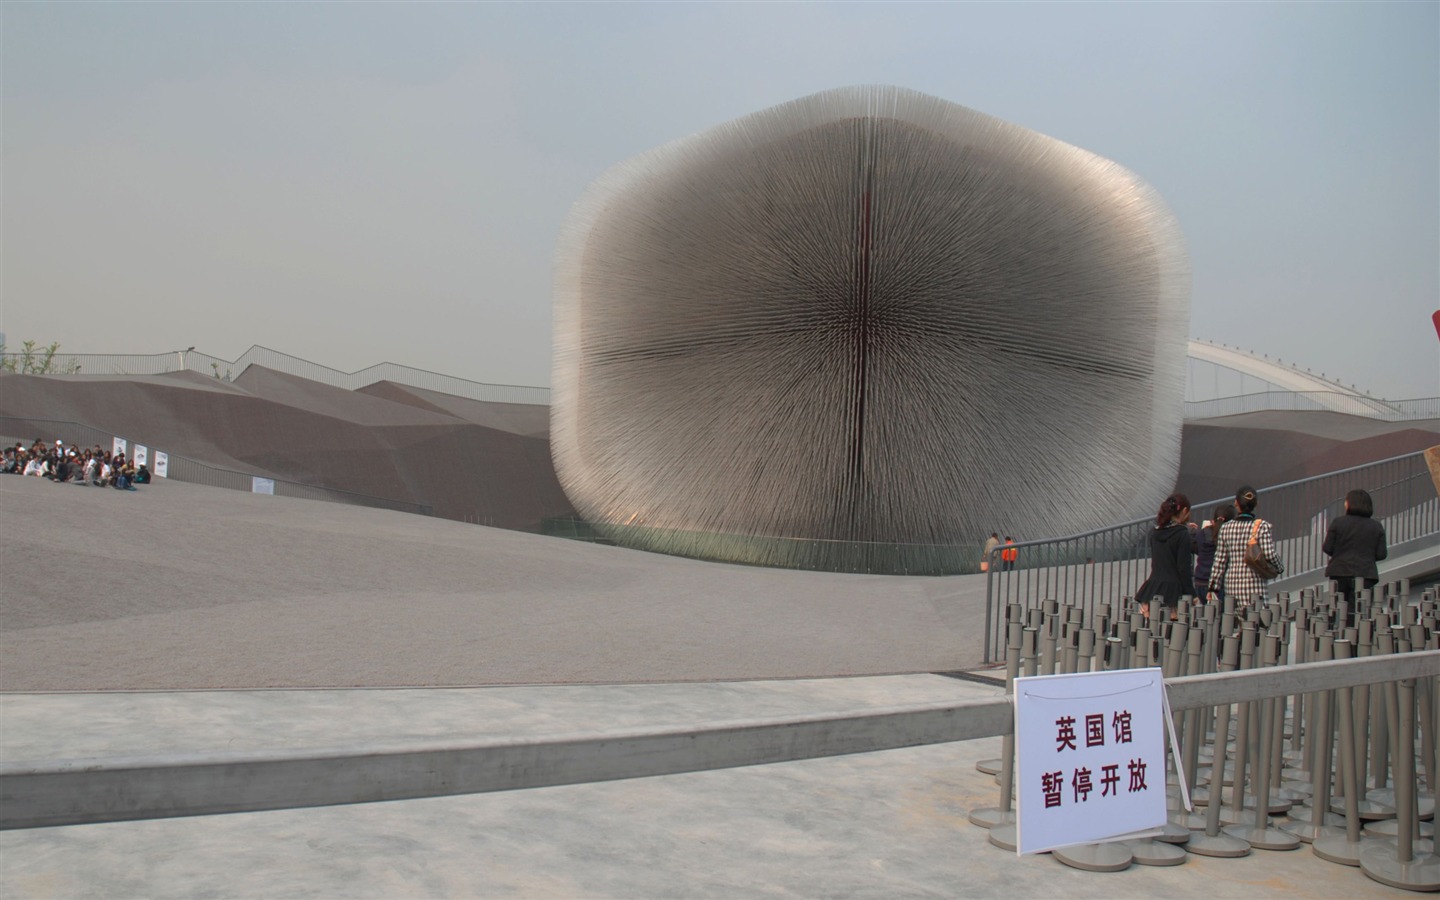 Commissioning of the 2010 Shanghai World Expo (studious works) #2 - 1440x900